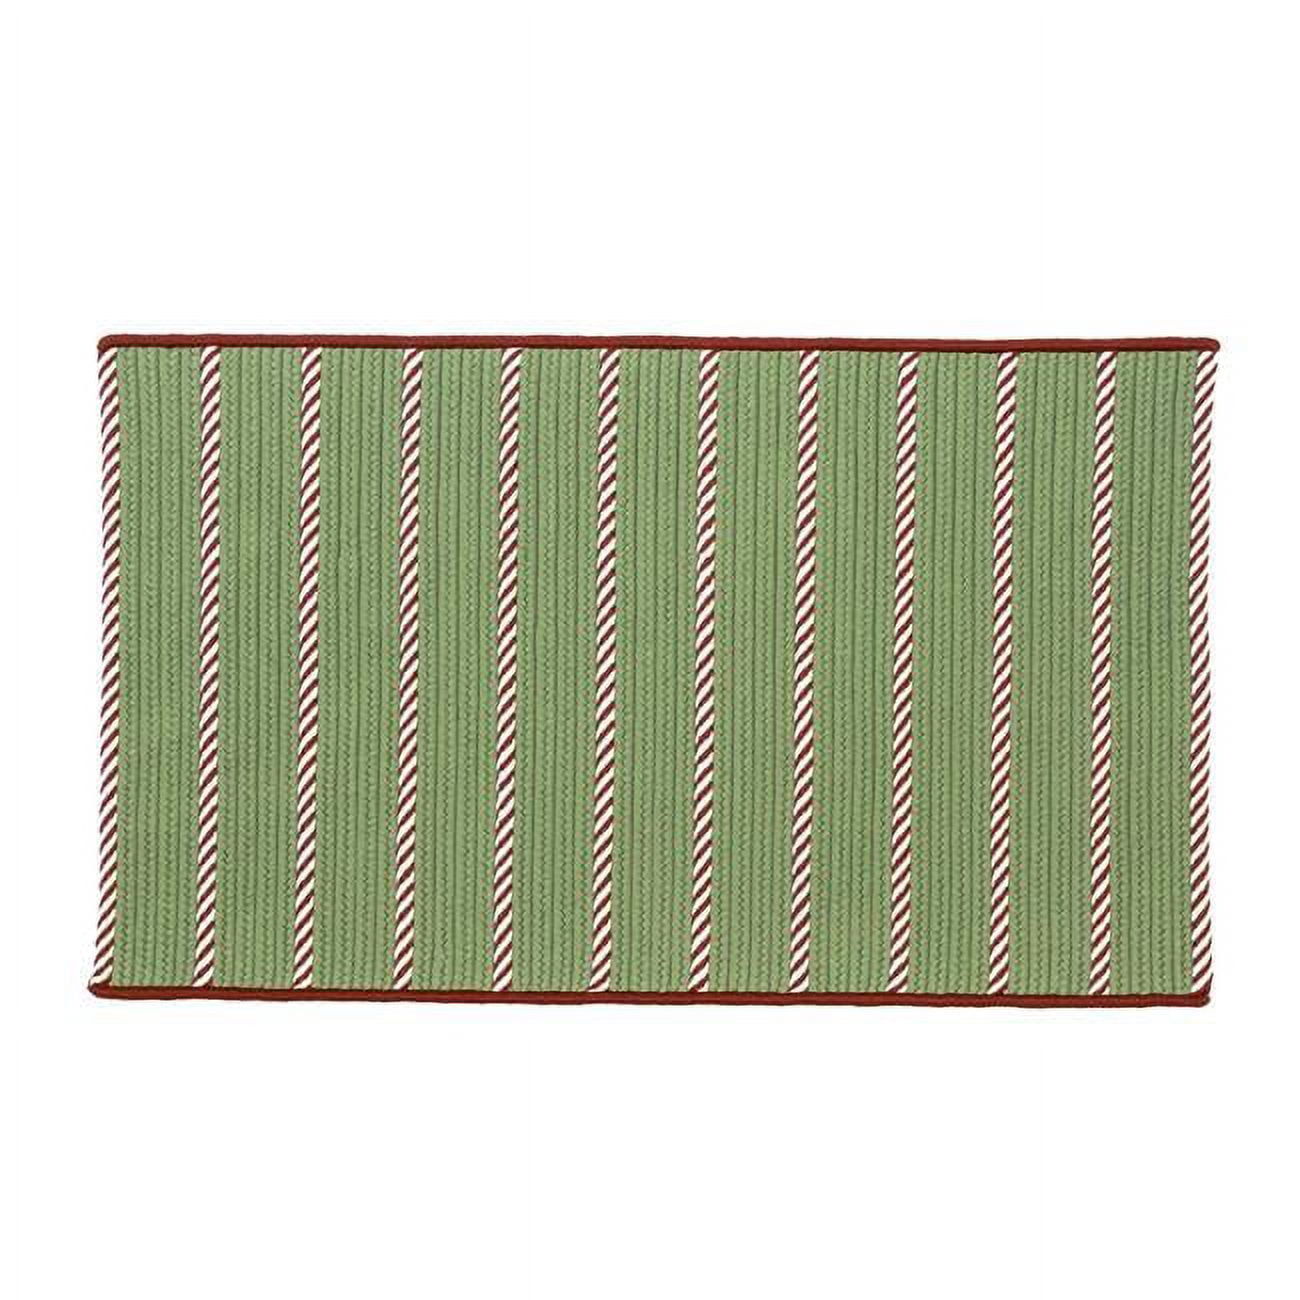 Designs-Done-Right 34 x 58 in. Naughty Elf Stripe Christmas Rectangle Rug - Green